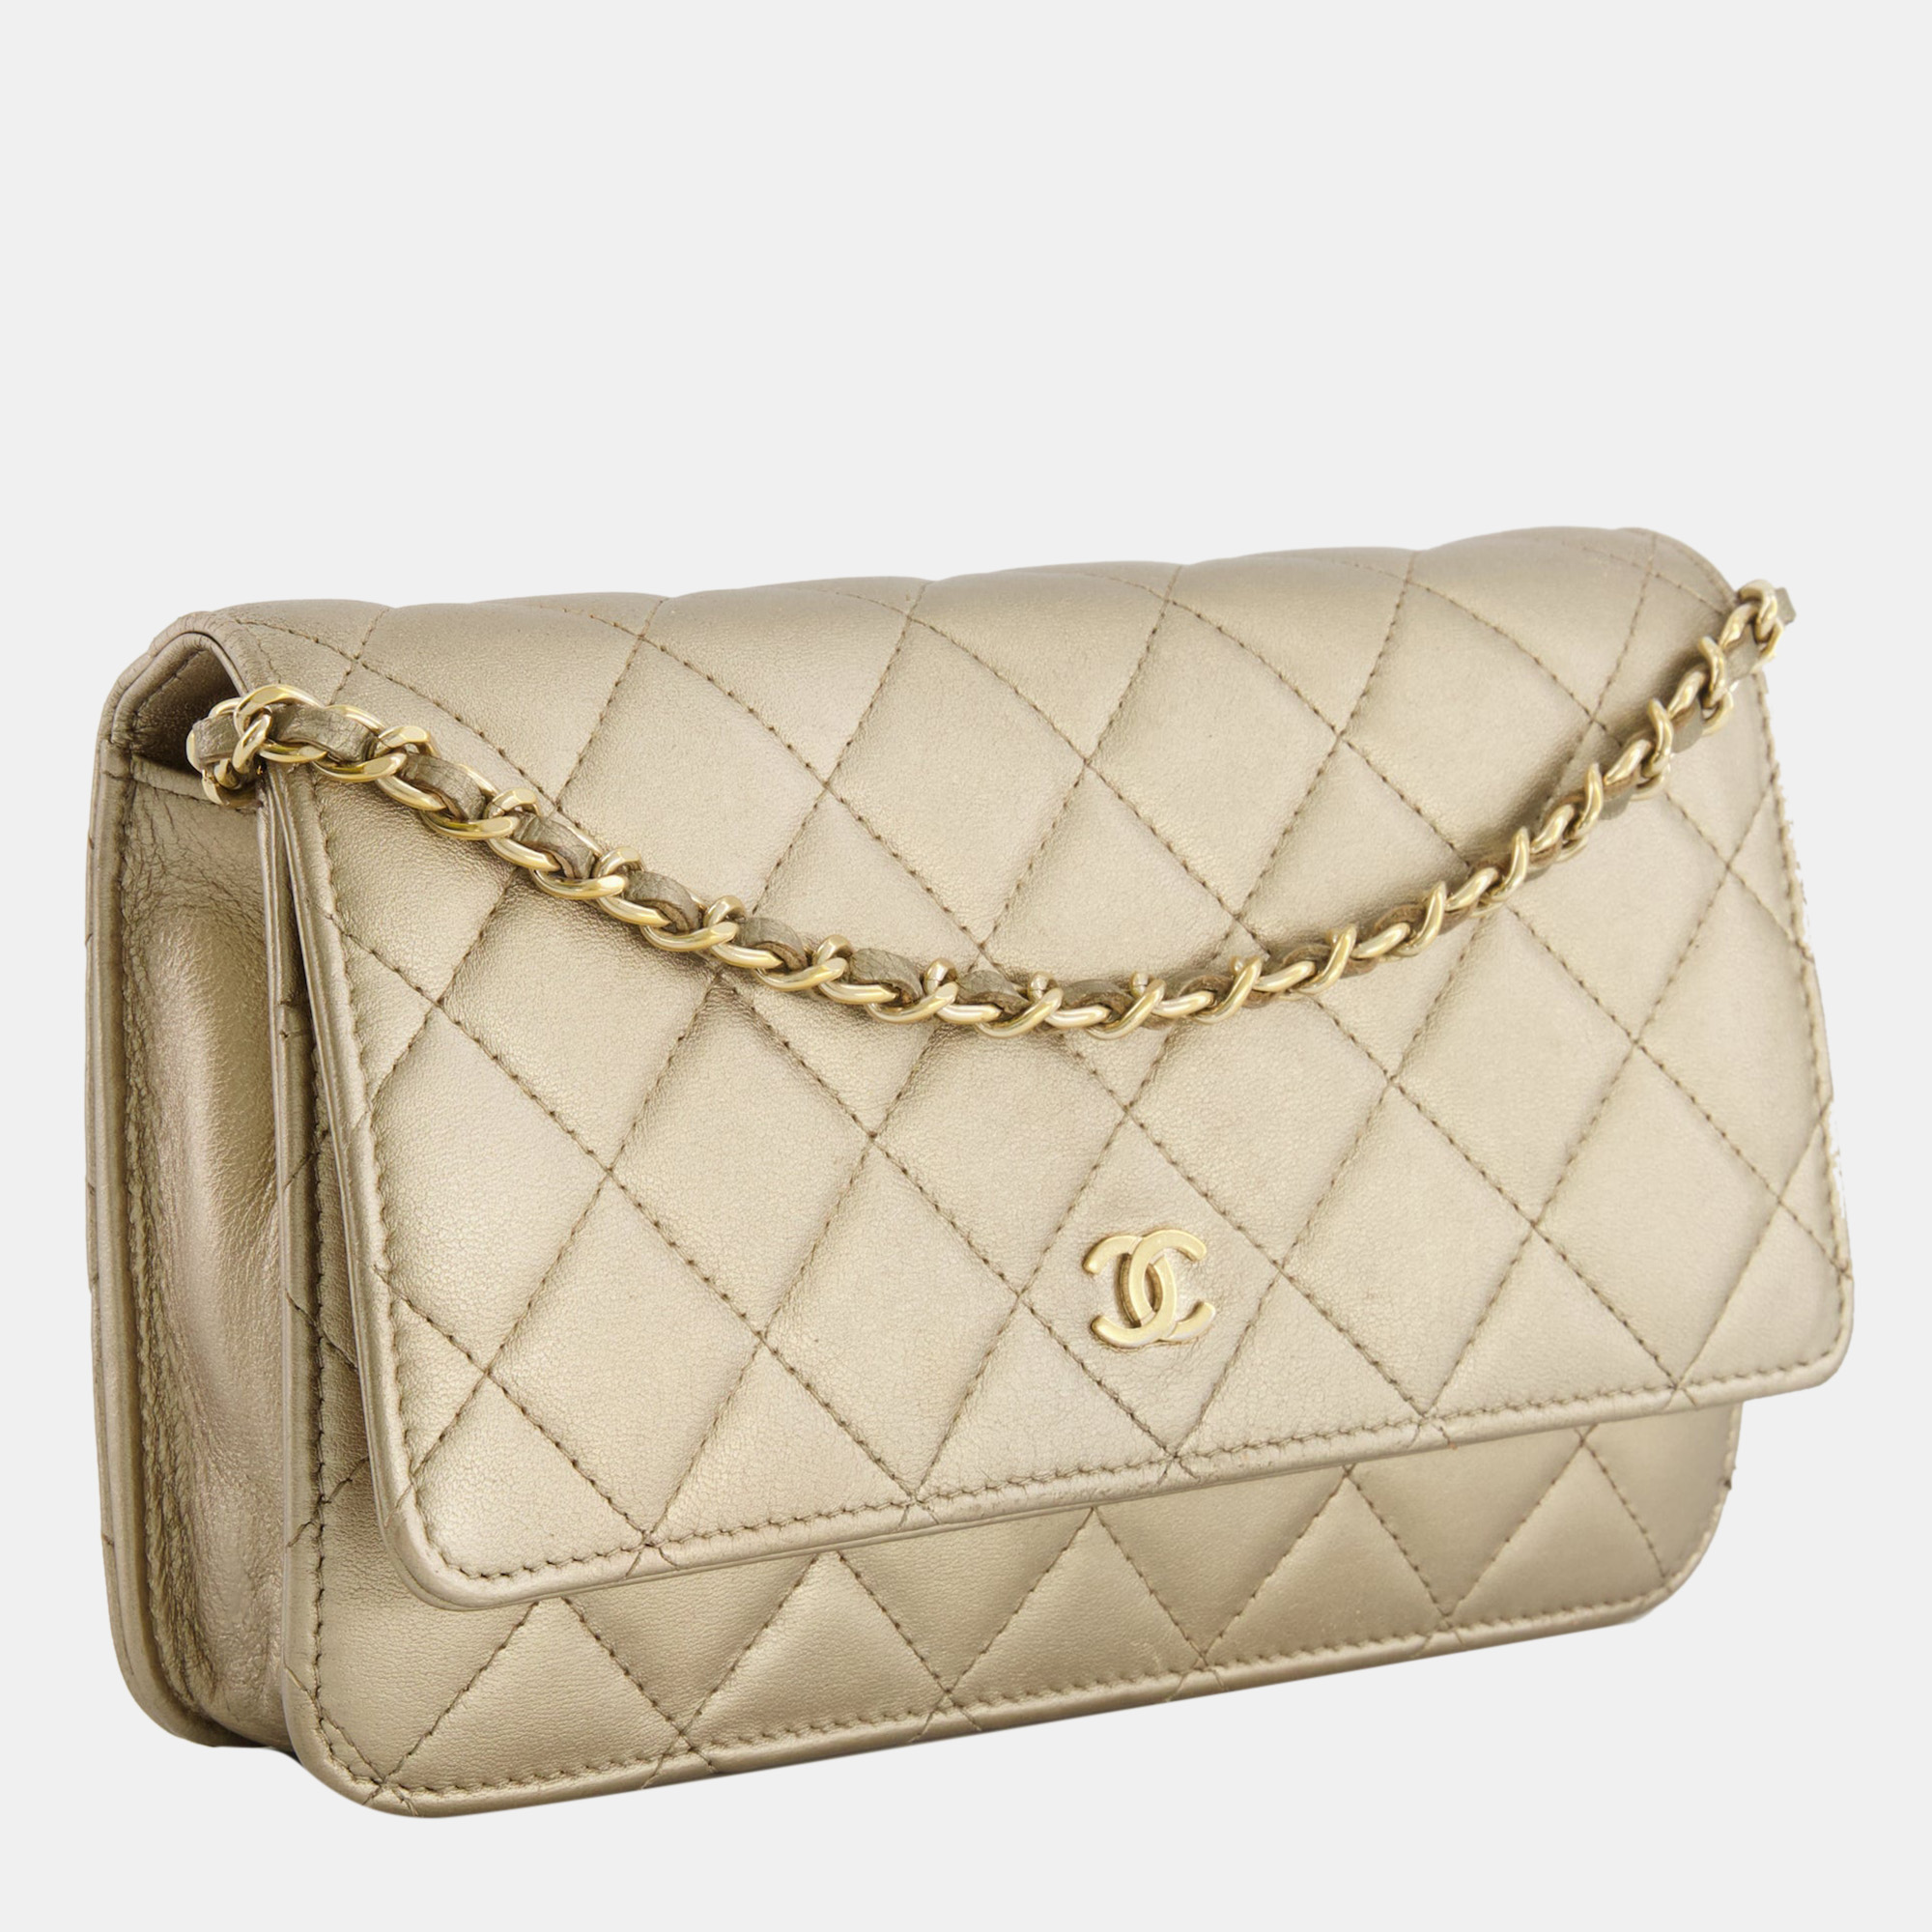 

Chanel Metallic Gold Wallet on Chain Bag in Lambskin Leather with Gold Hardware